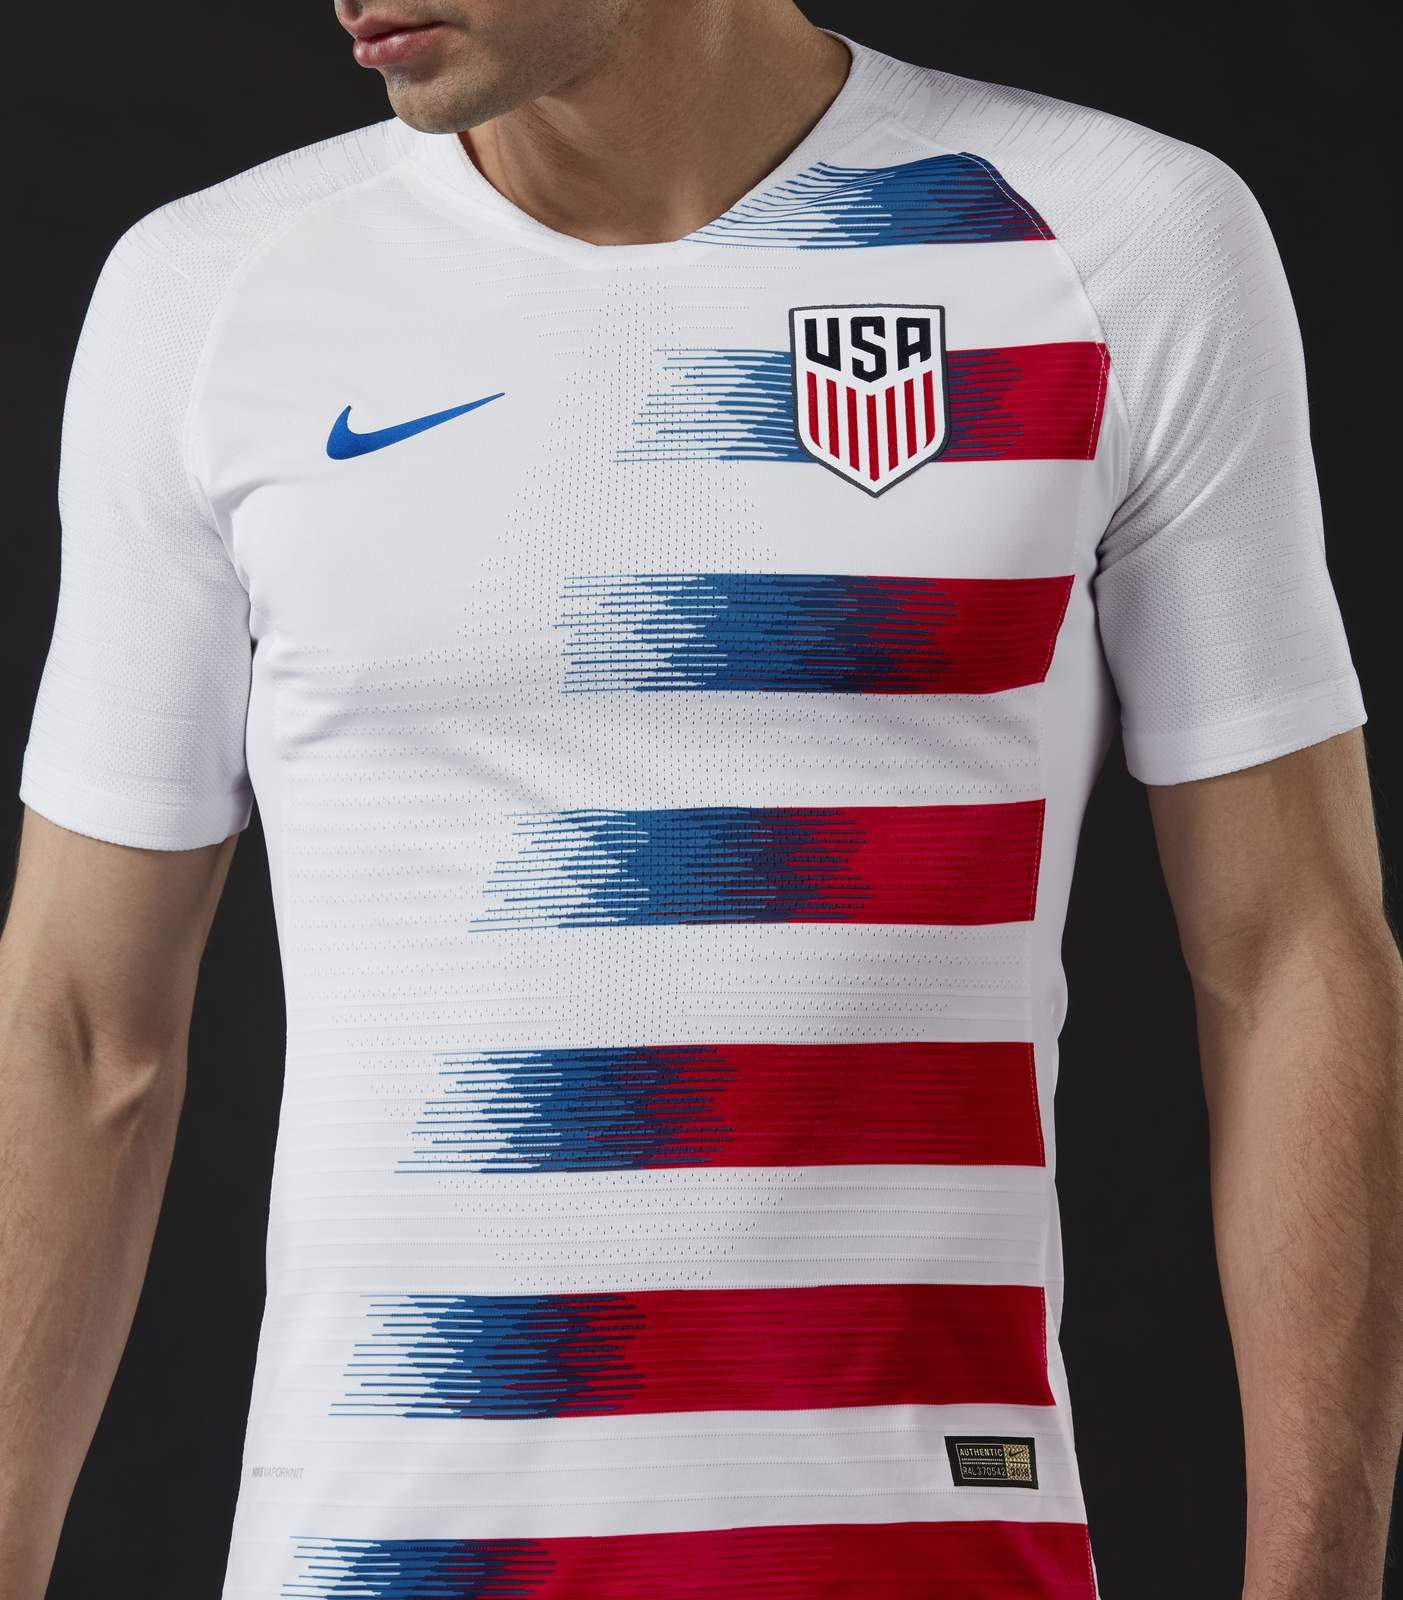 2018 USA World Cup kit: Potential new jersey leaked - Sports Illustrated